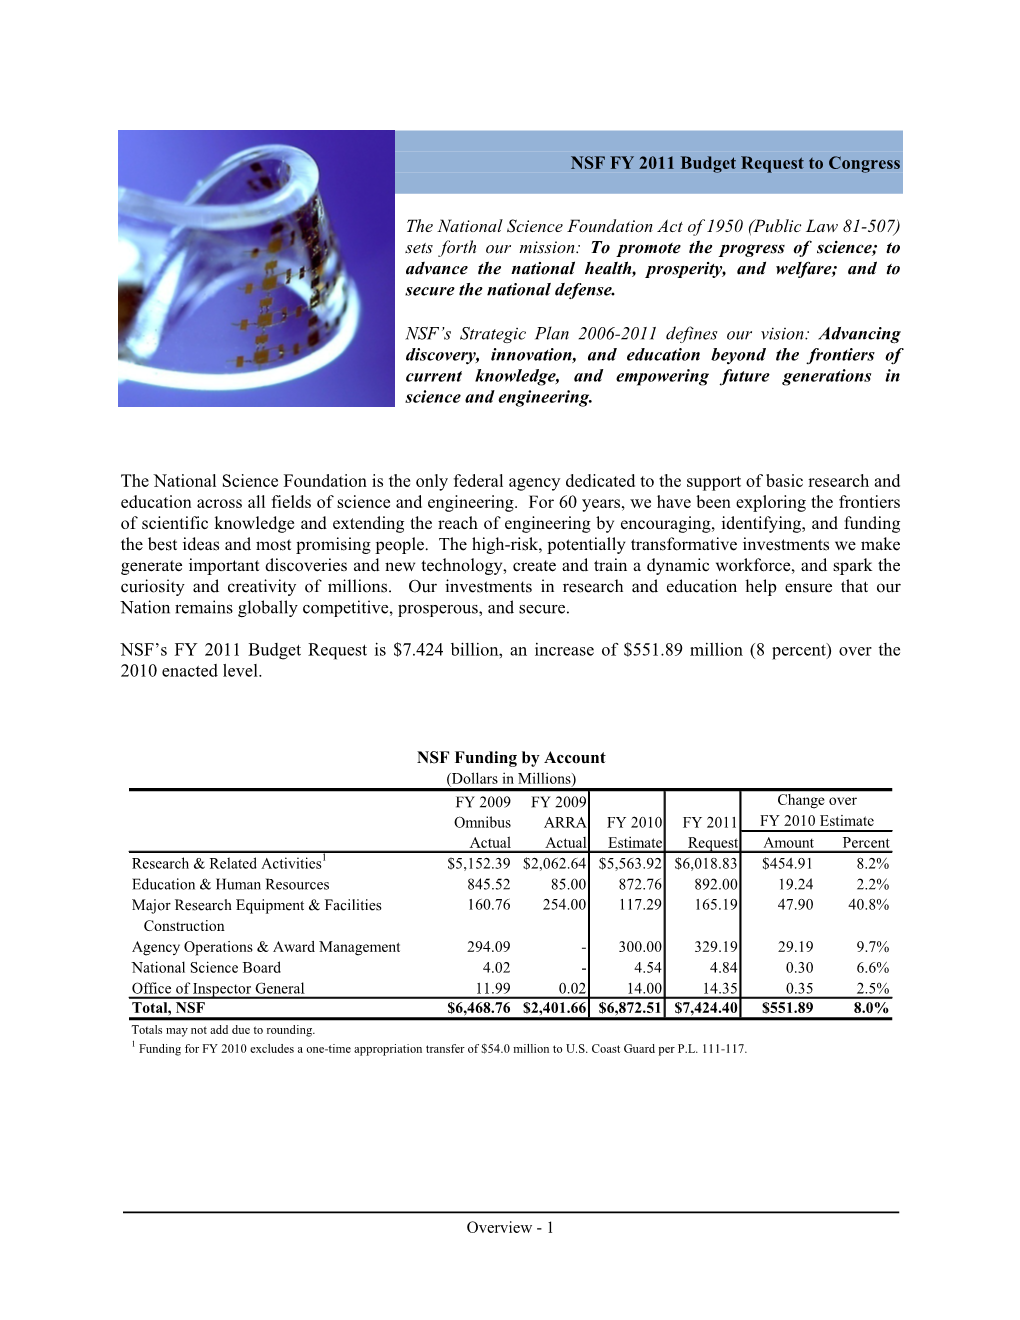 NSF FY 2011 Budget Request to Congress the National Science